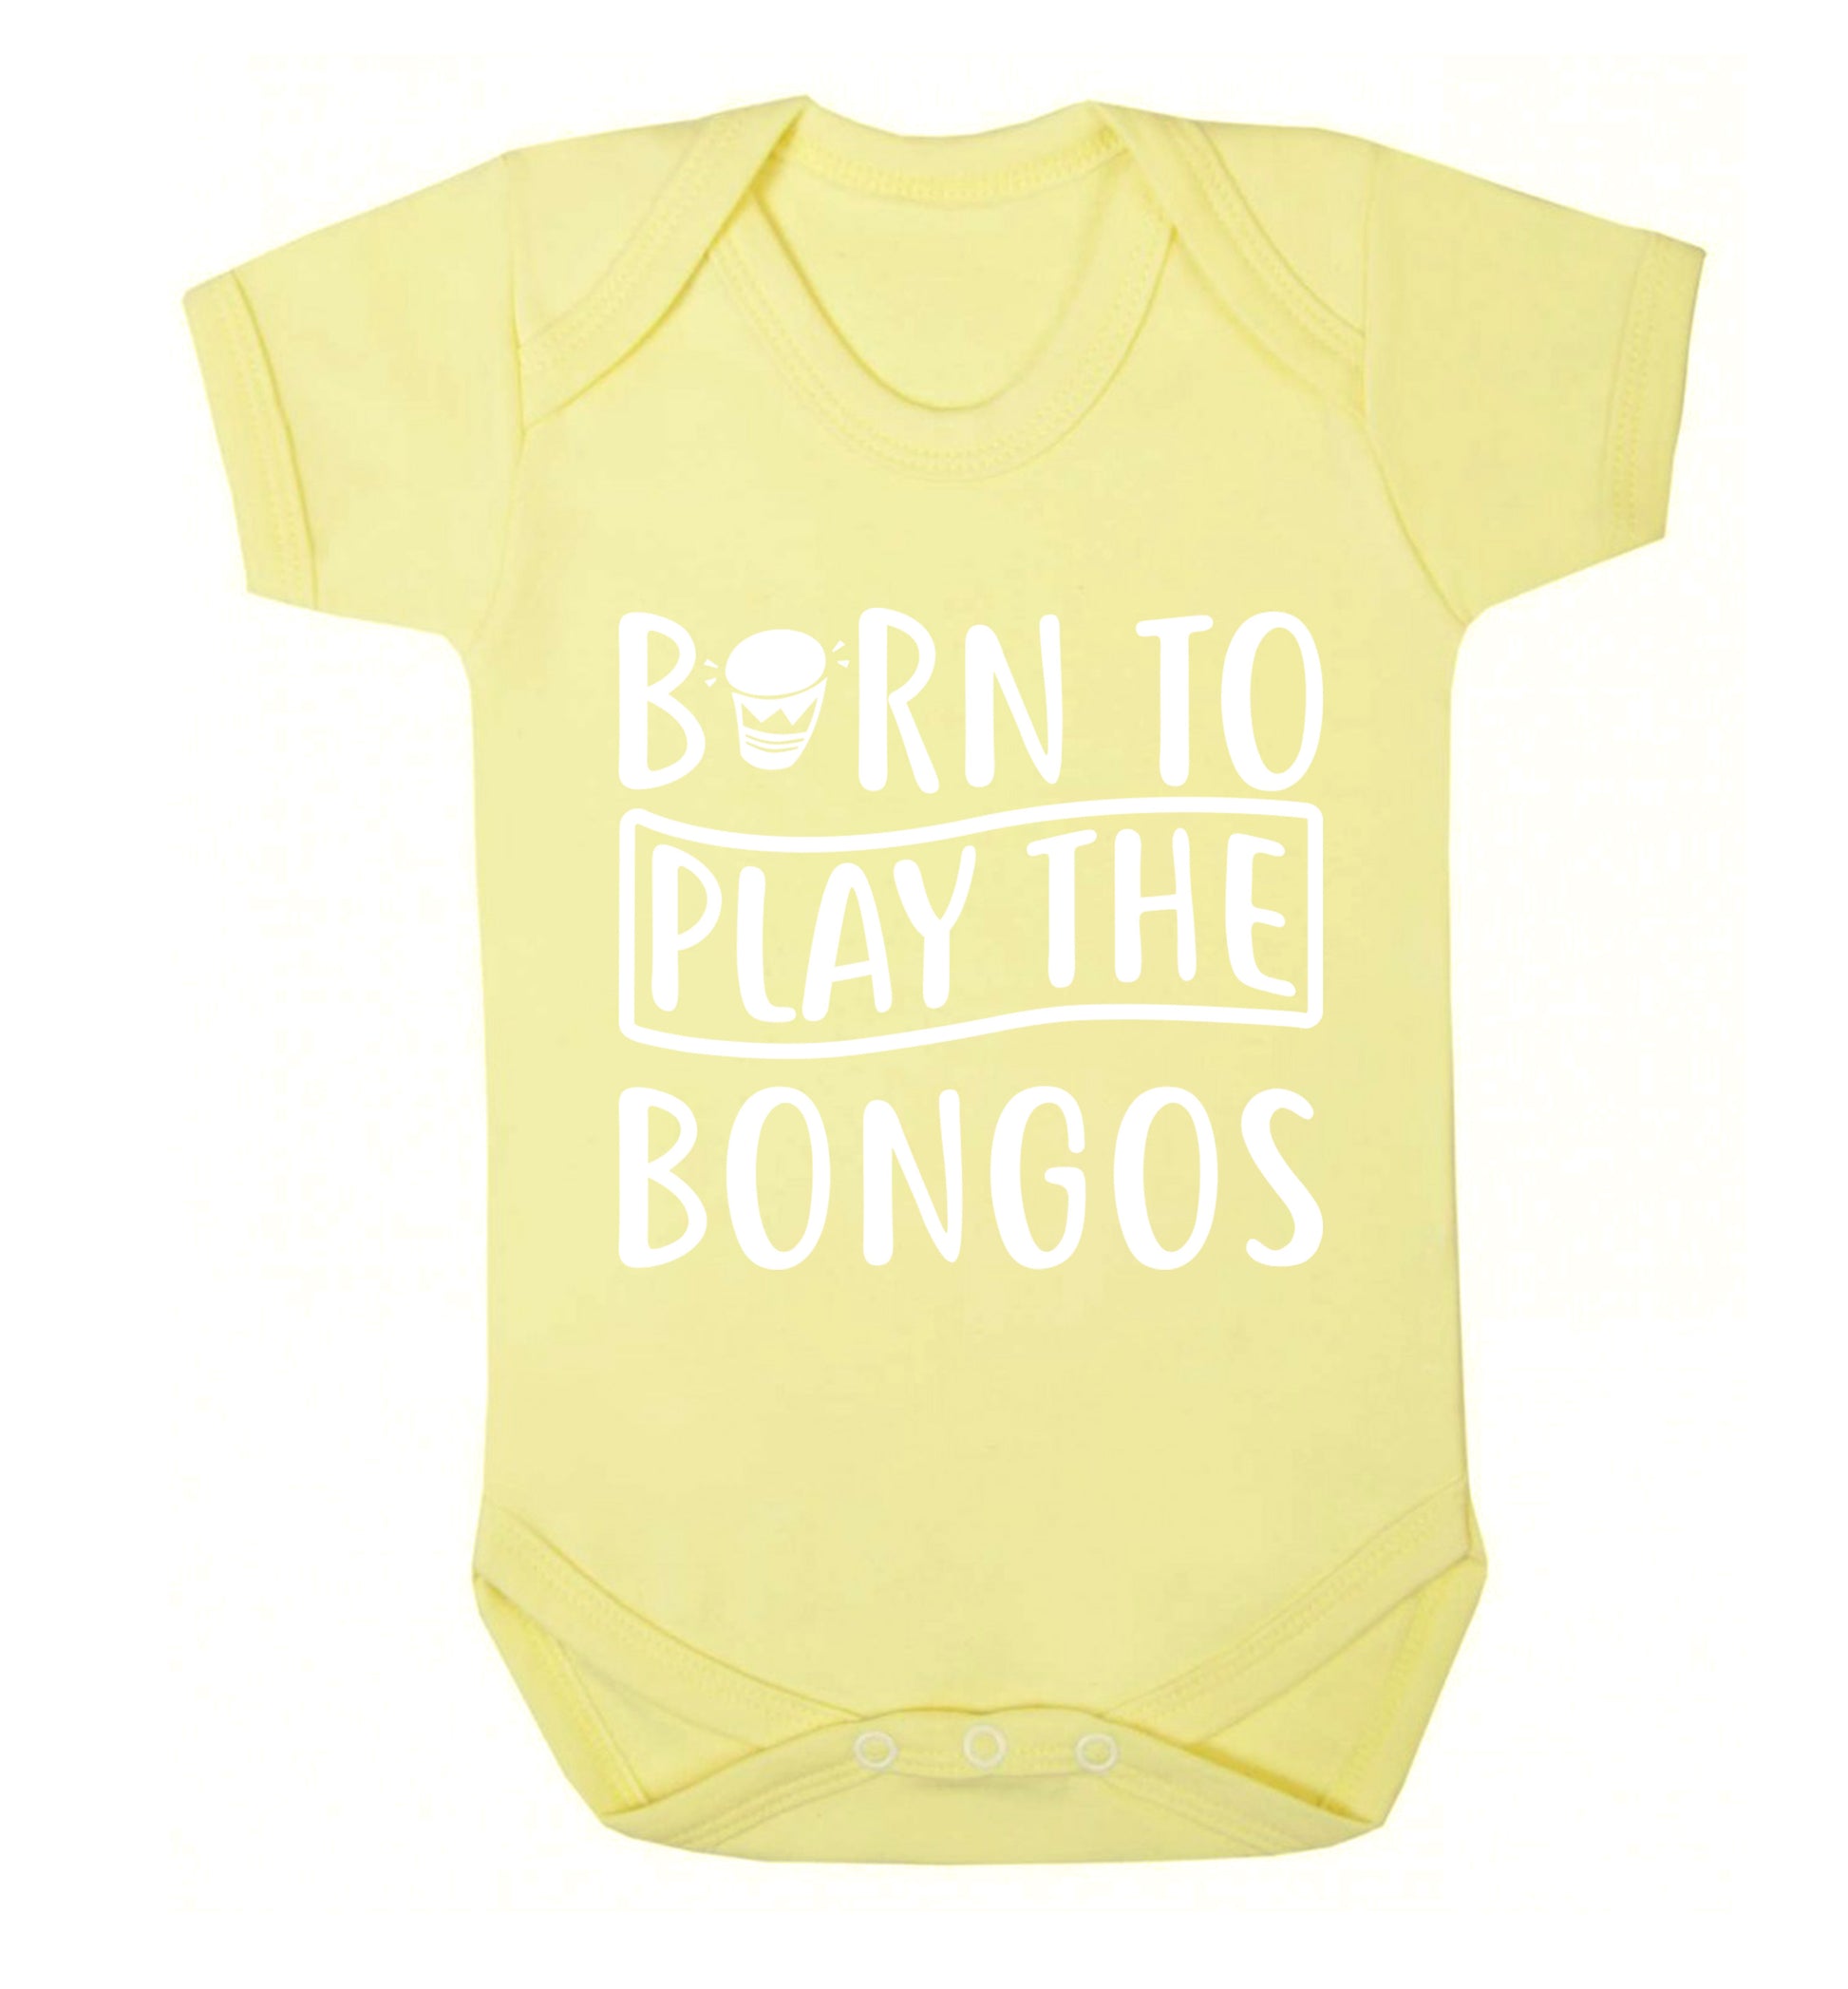 Born to play the bongos Baby Vest pale yellow 18-24 months